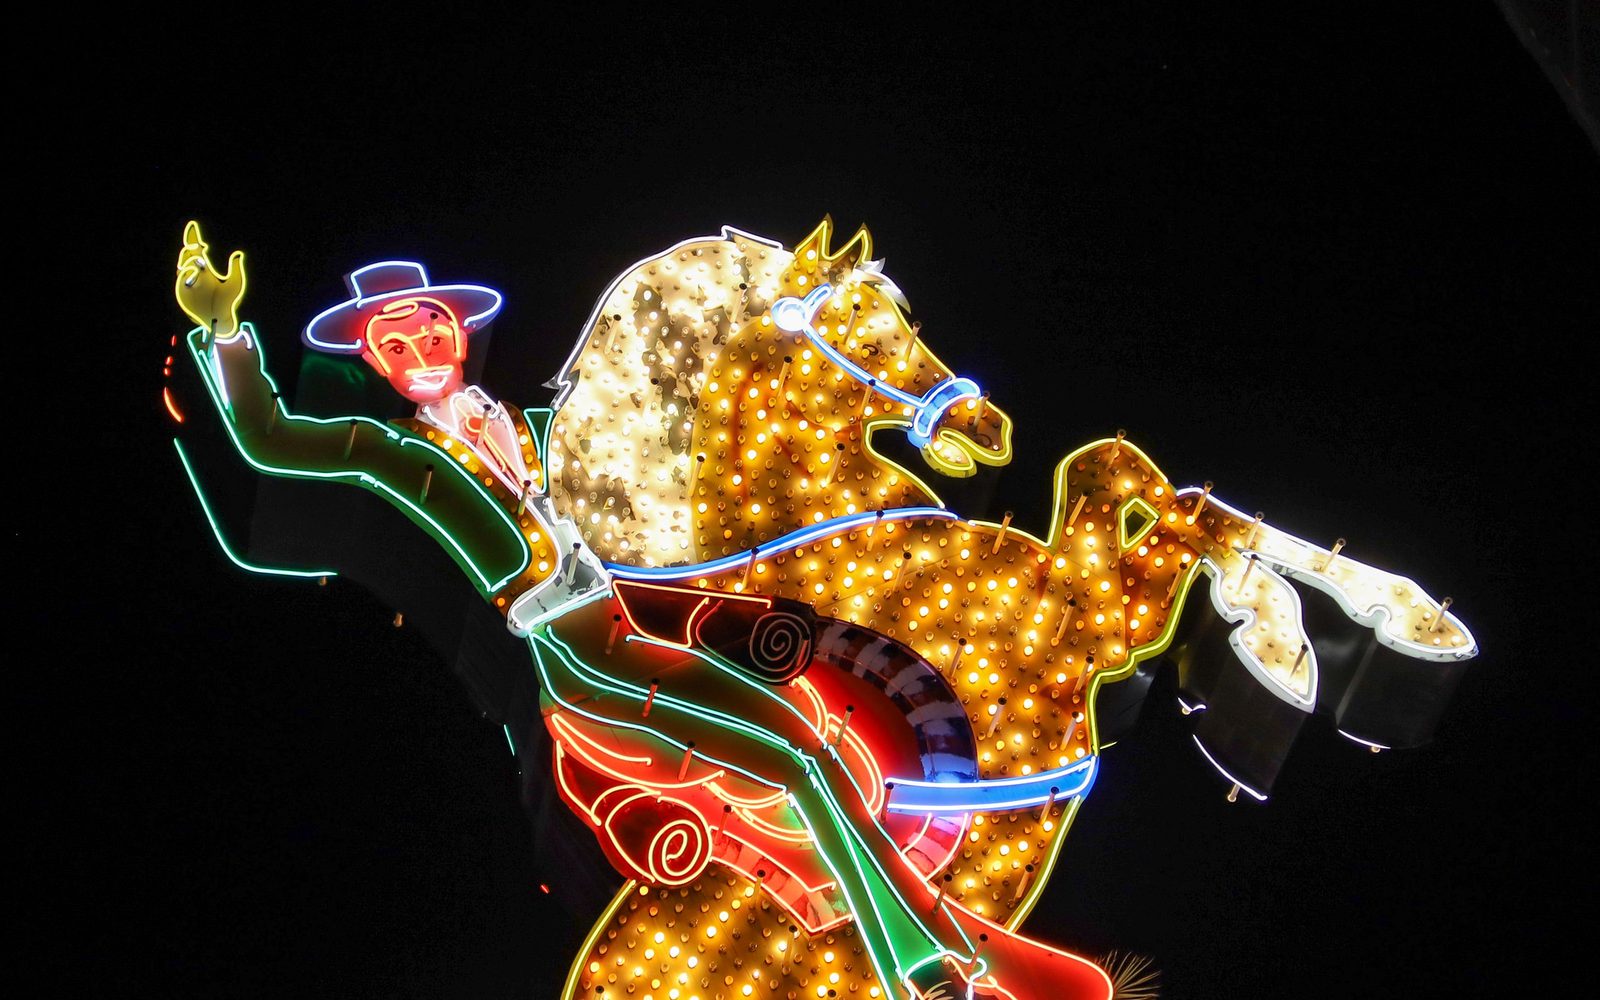 The Hacienda Horse and Rider depicting what is probably the first Person of Color represented on a neon sign.